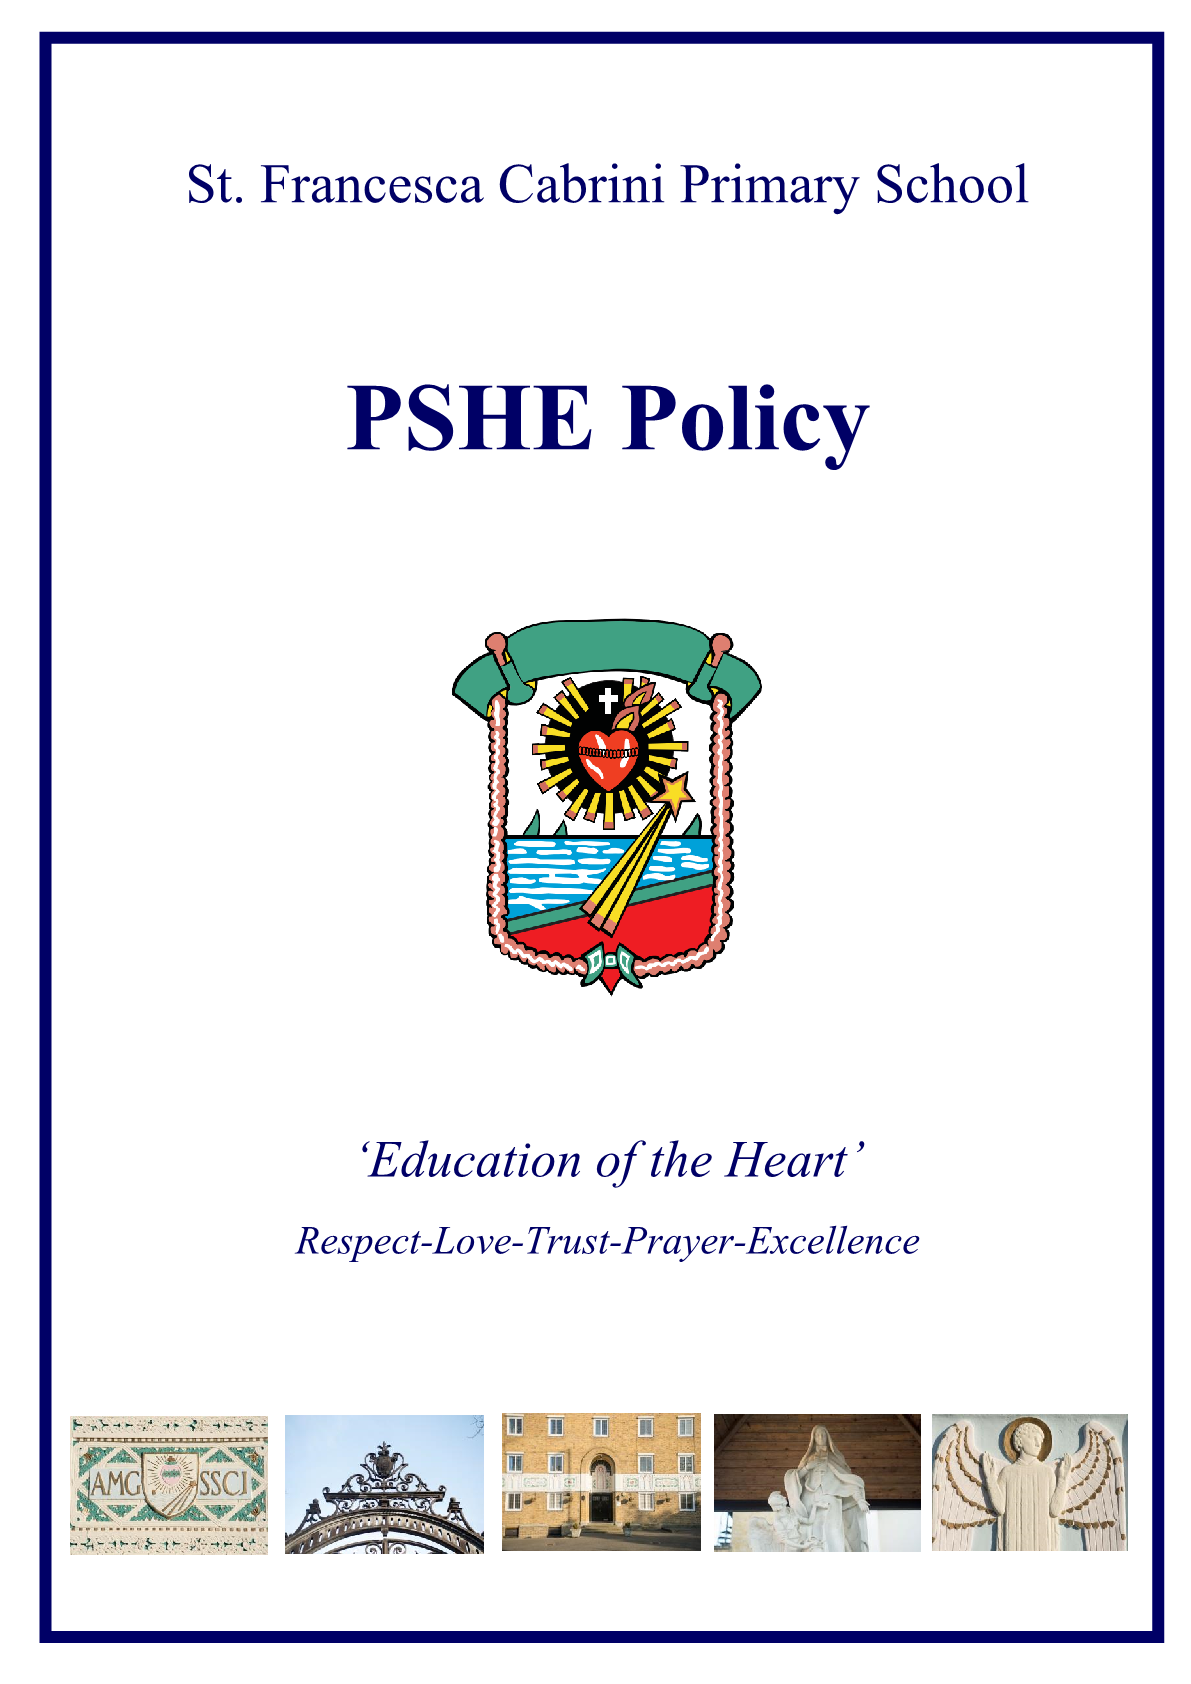 PSHE Policy